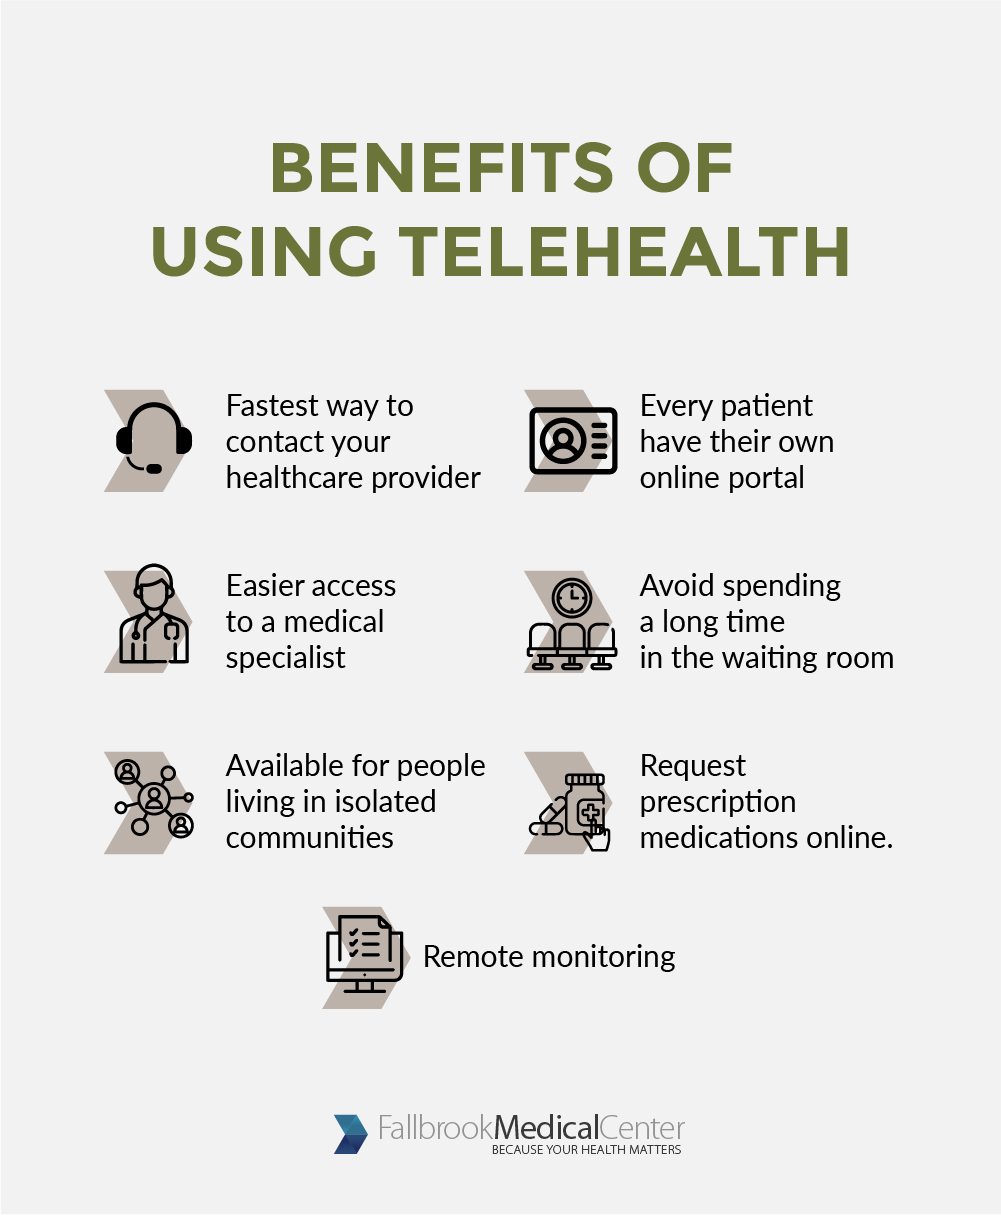 Telehealth: Technology and Healthcare